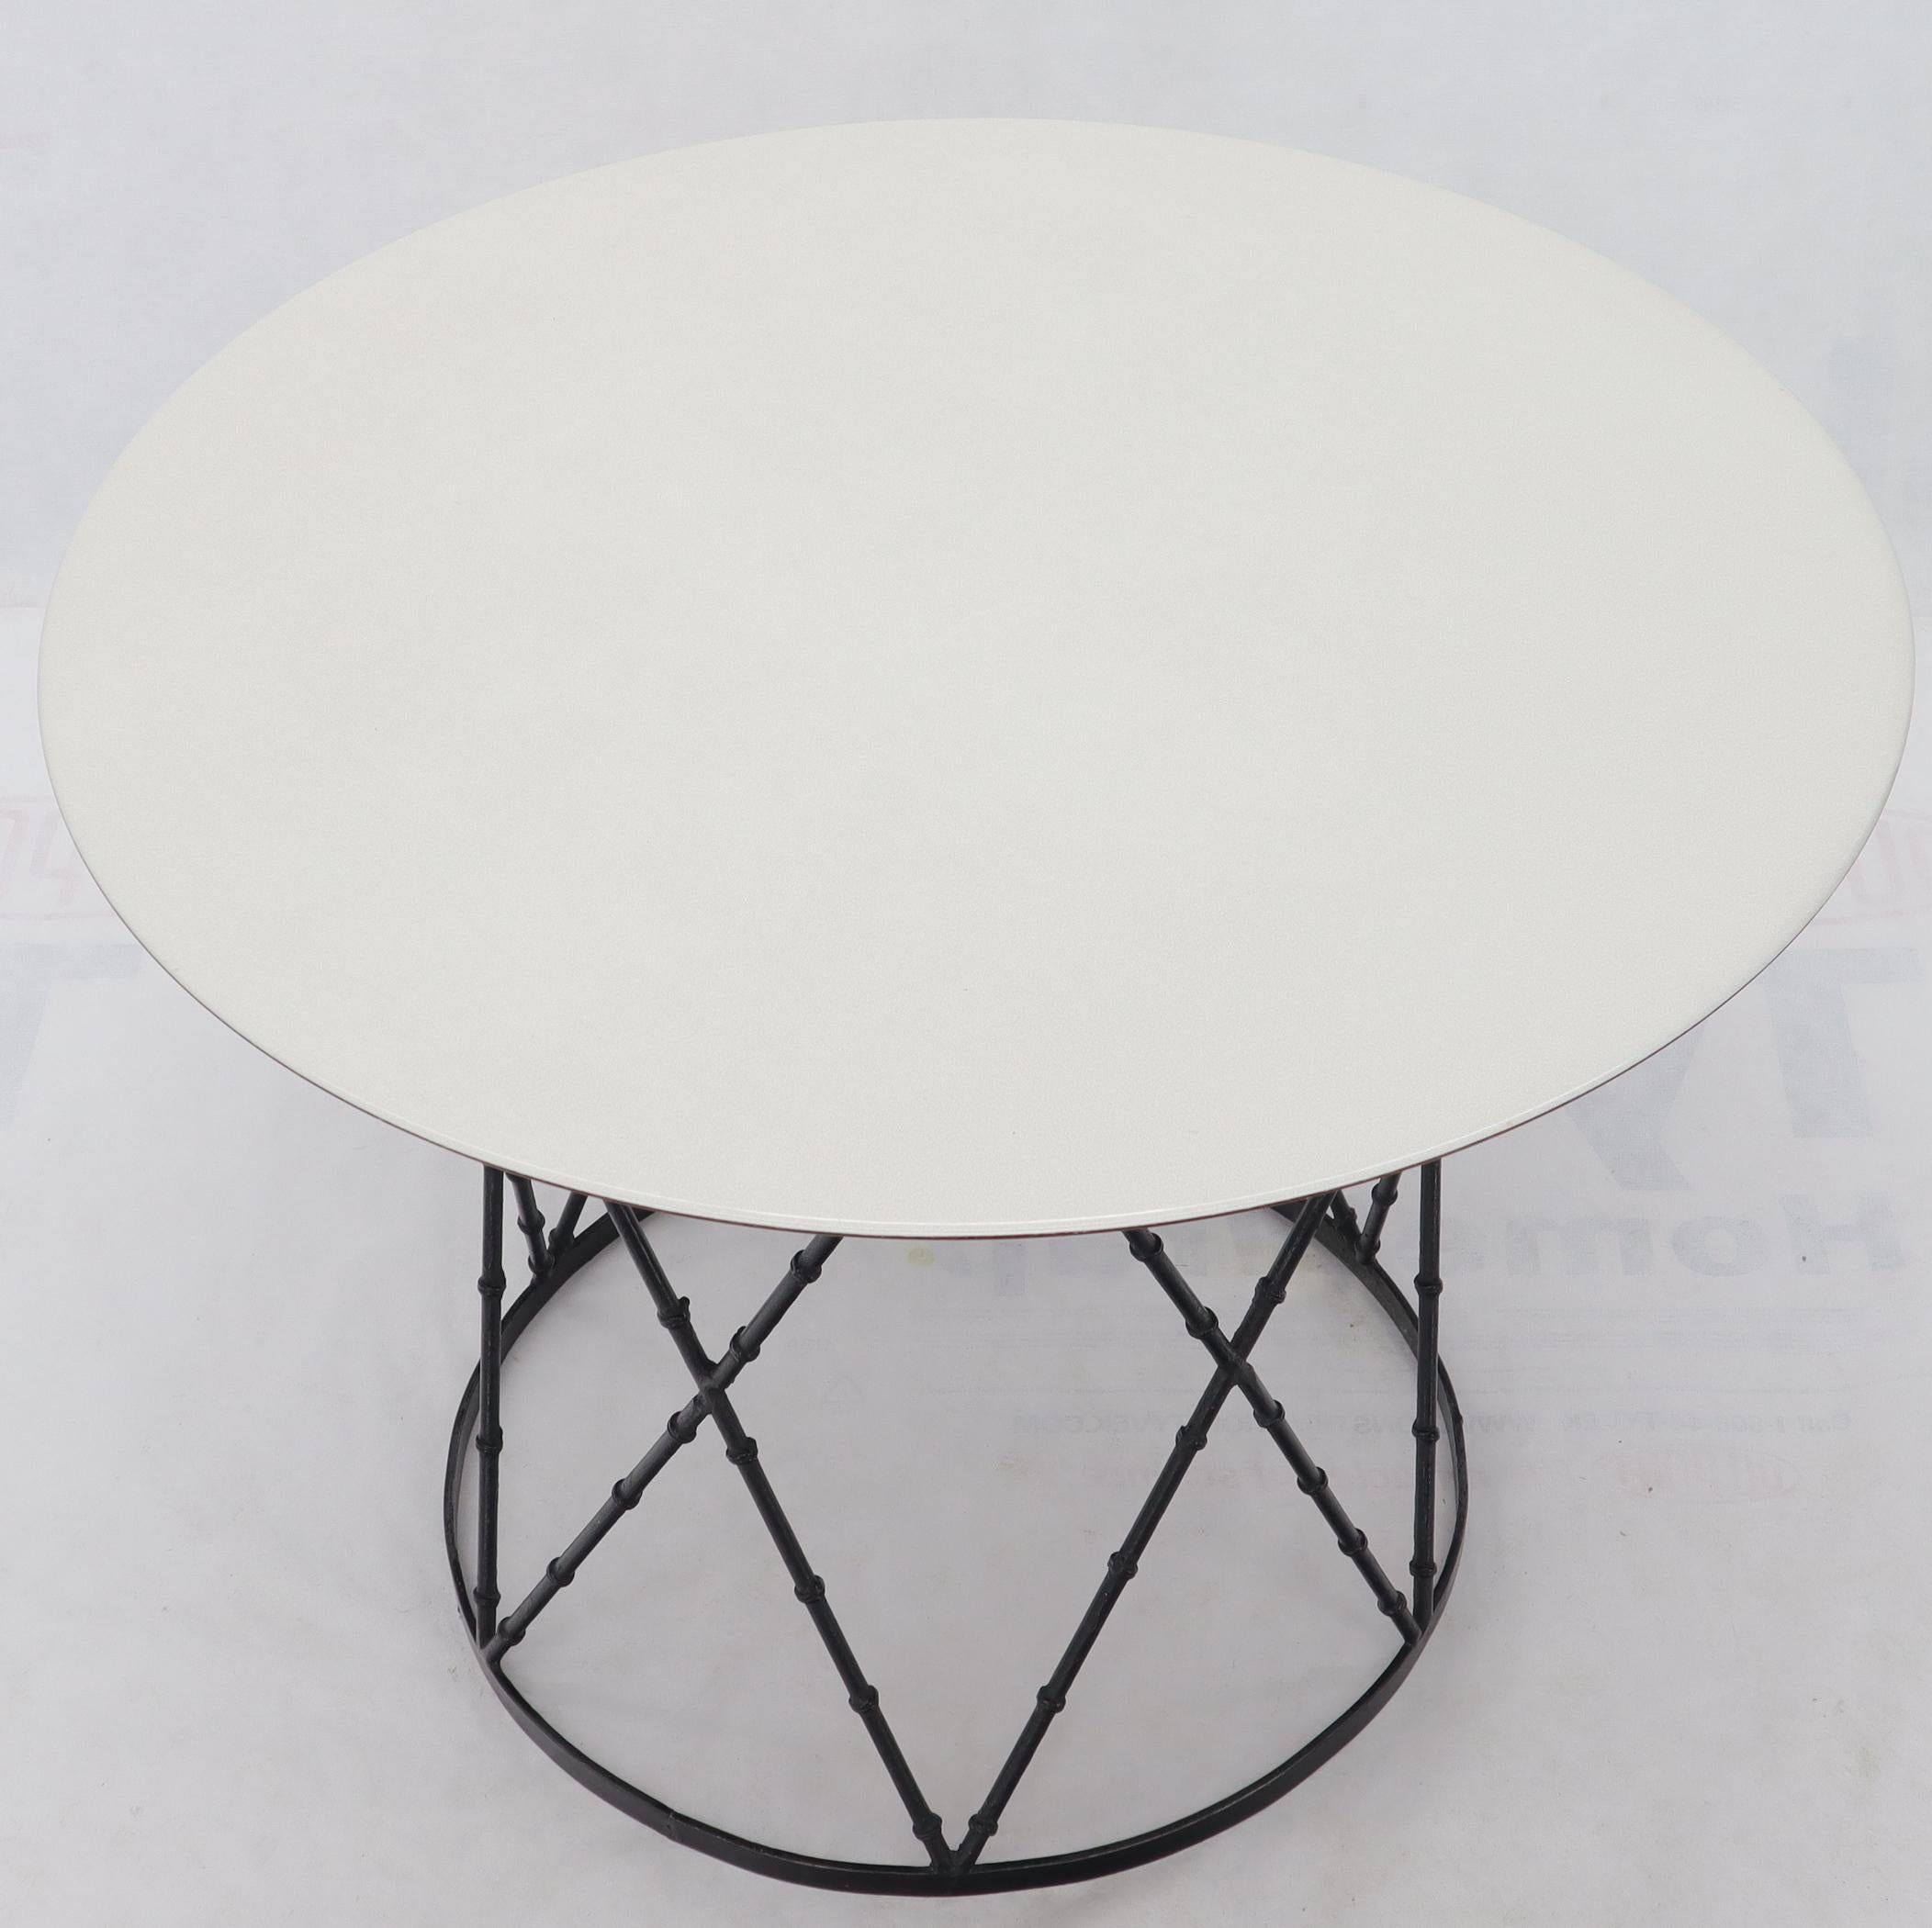 Forged Enameled Top Faux Bamboo Base Mid-Century Modern Dining Dinette Table For Sale